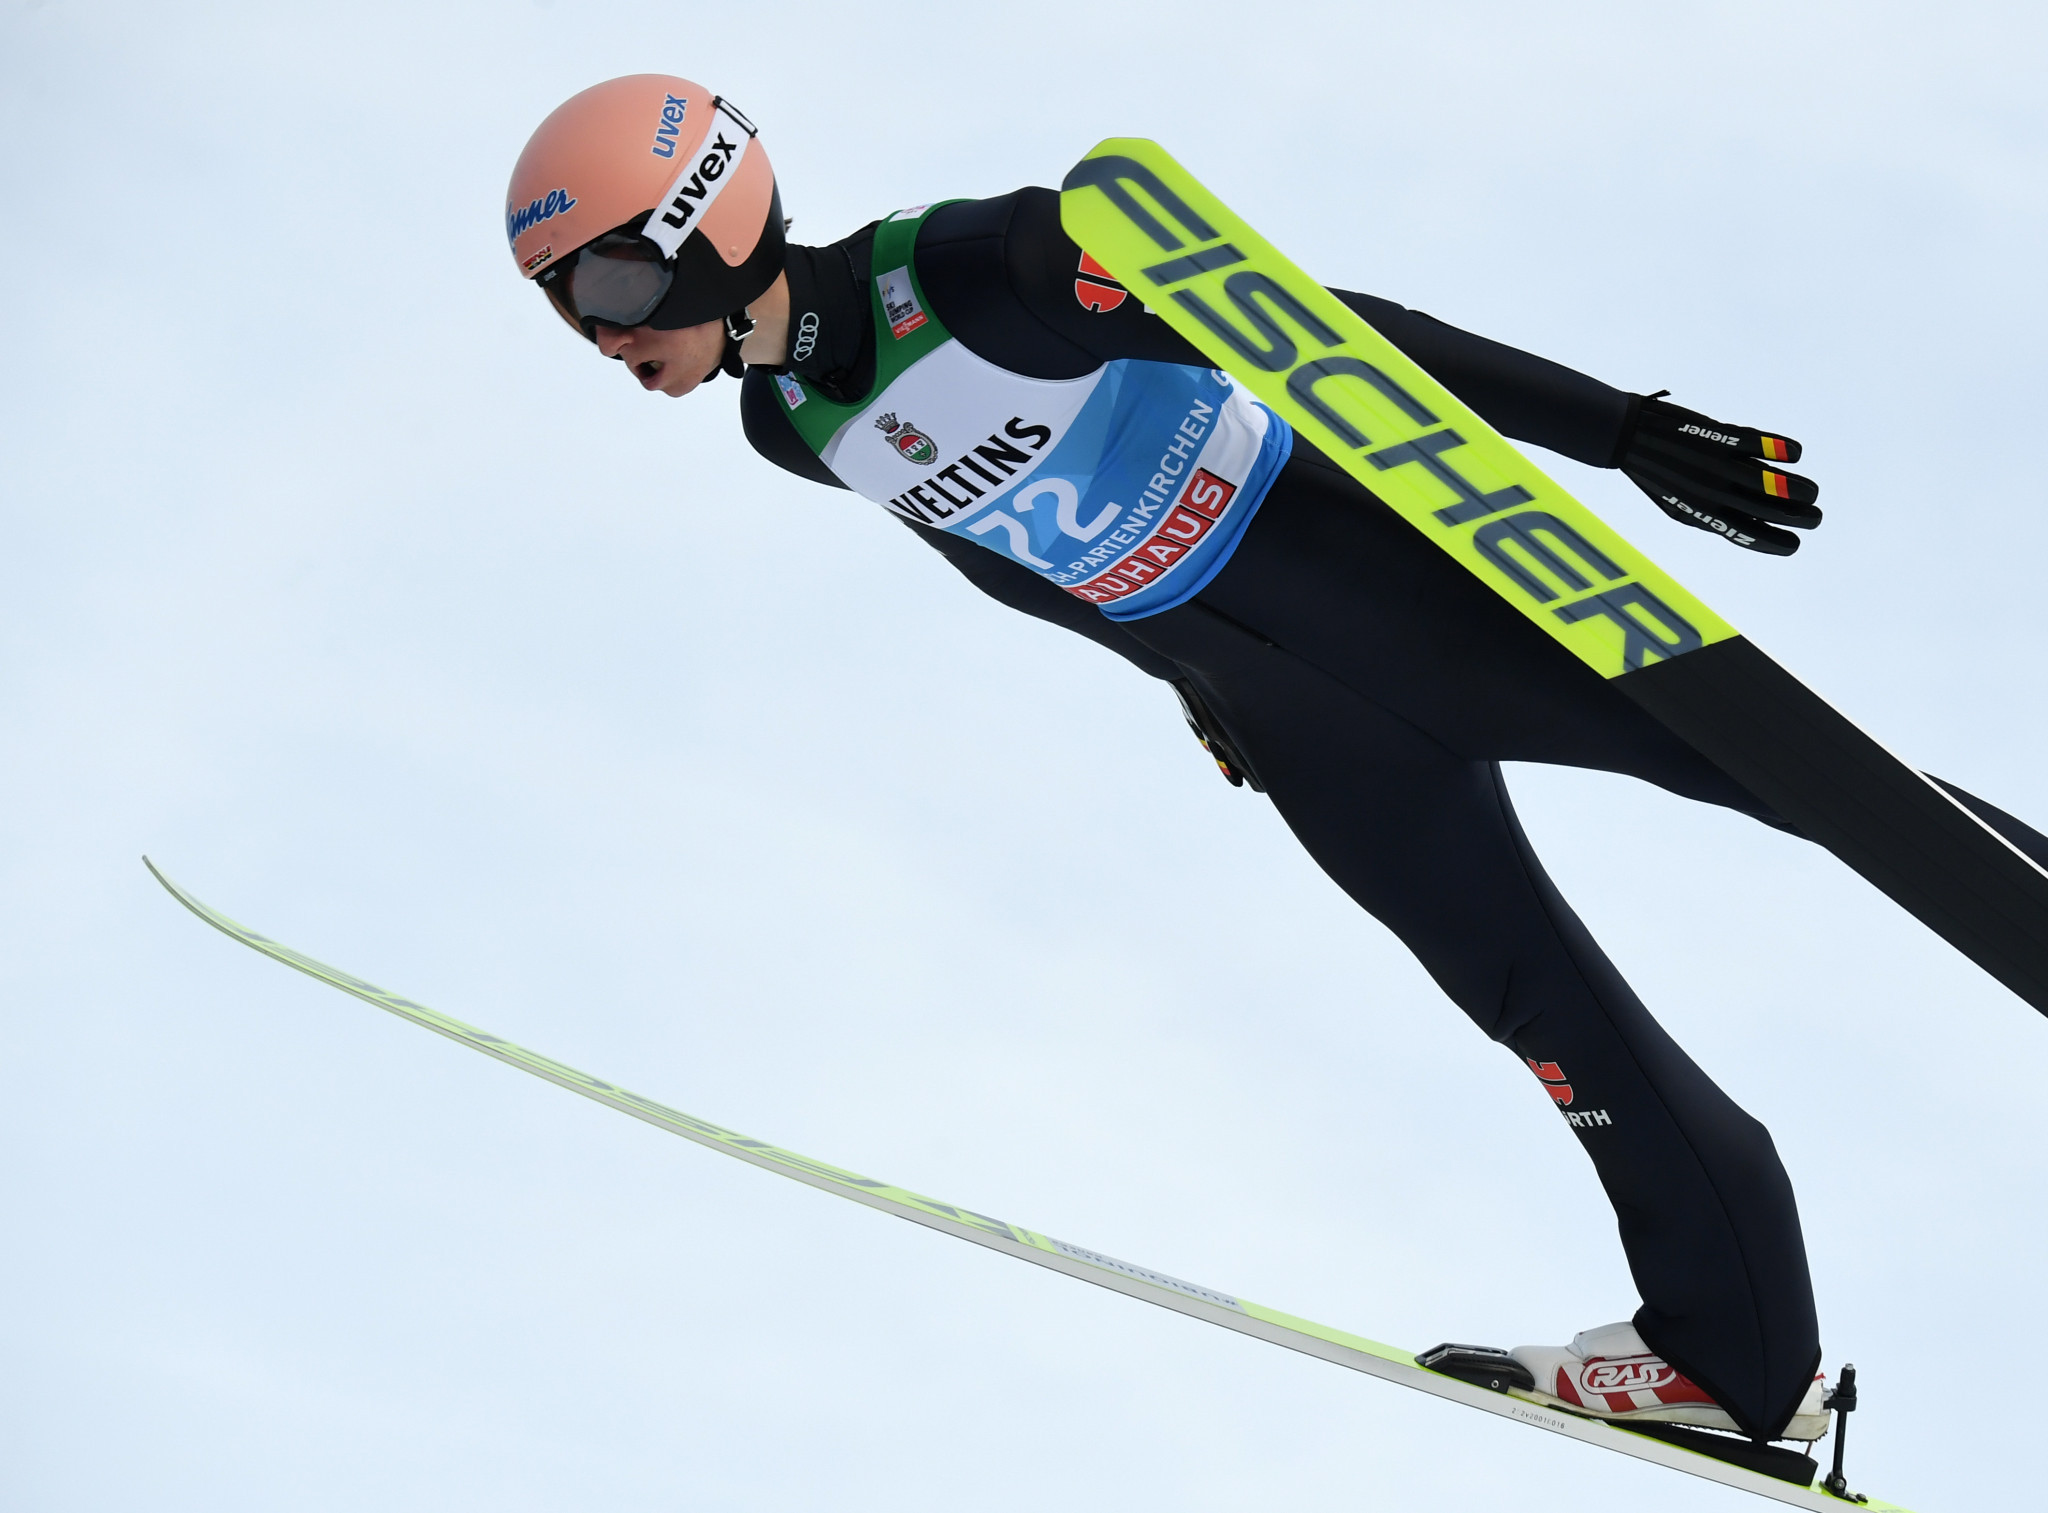 Geiger tops qualification at second Four Hills Tournament event